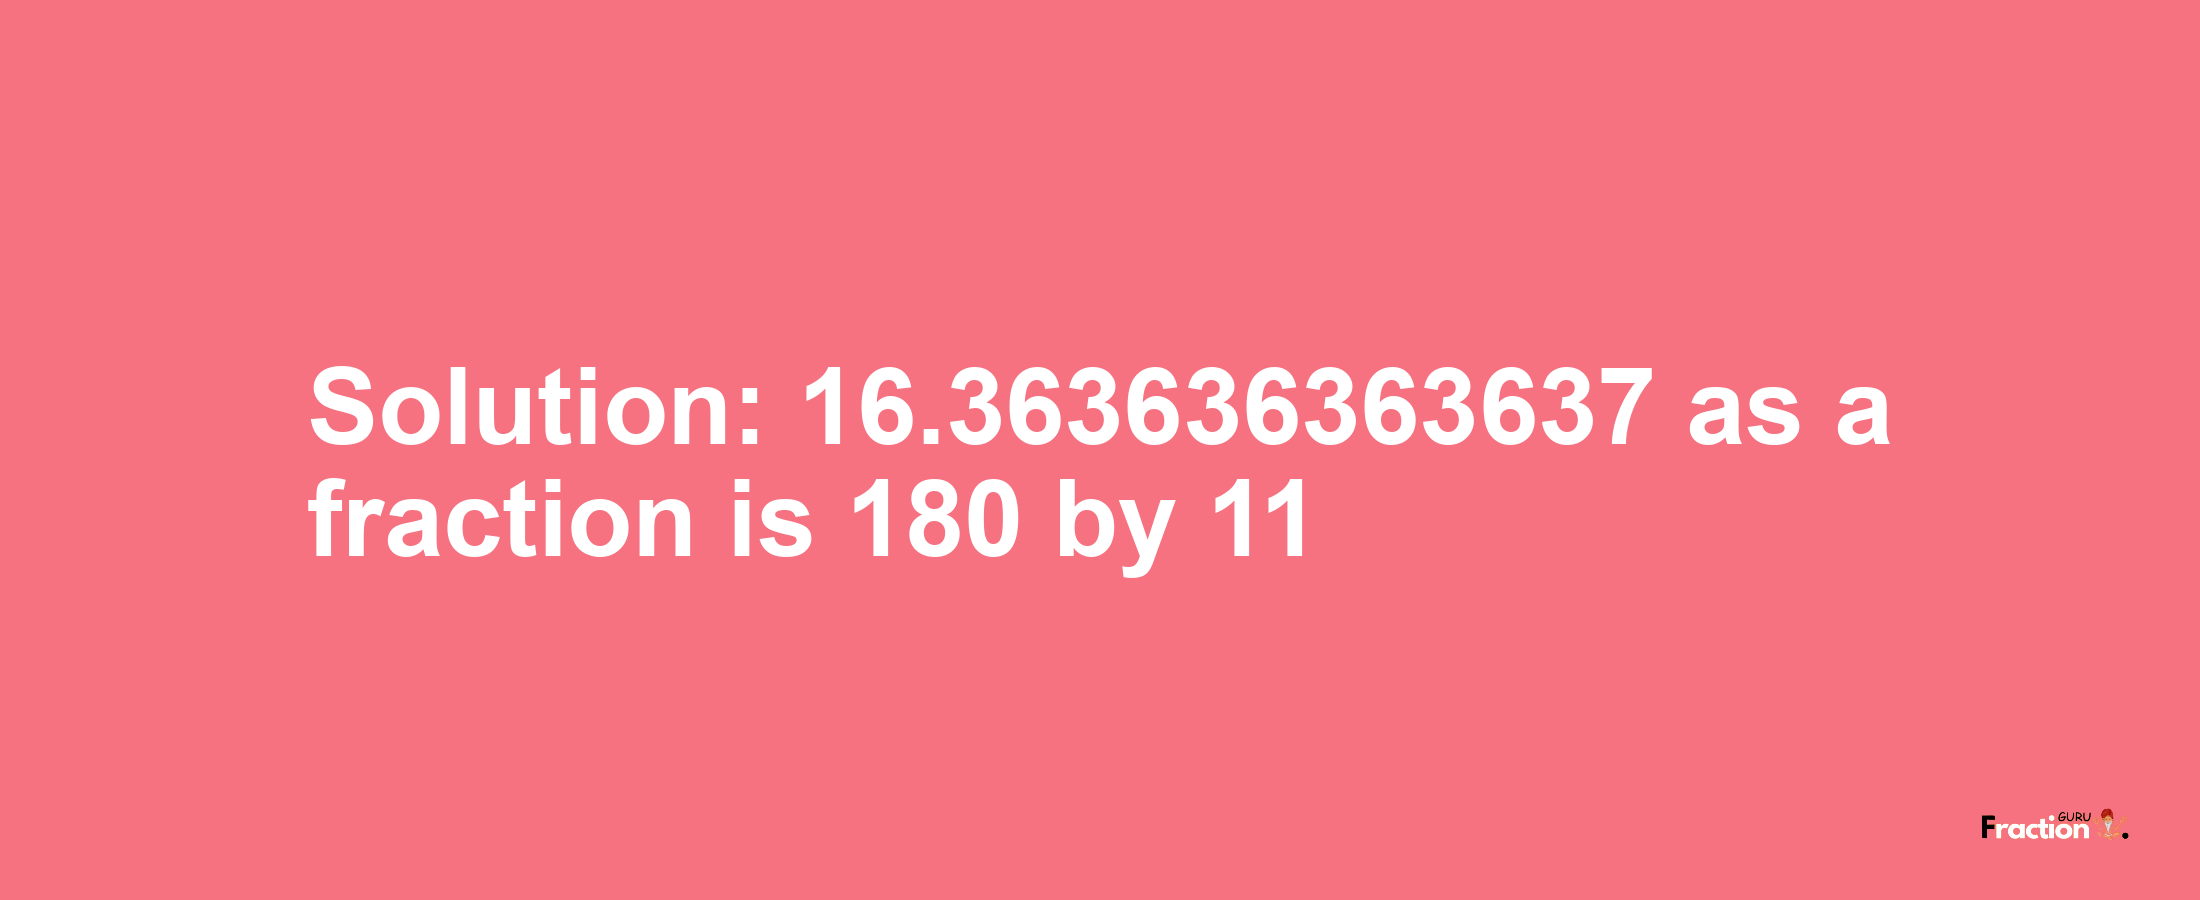 Solution:16.363636363637 as a fraction is 180/11